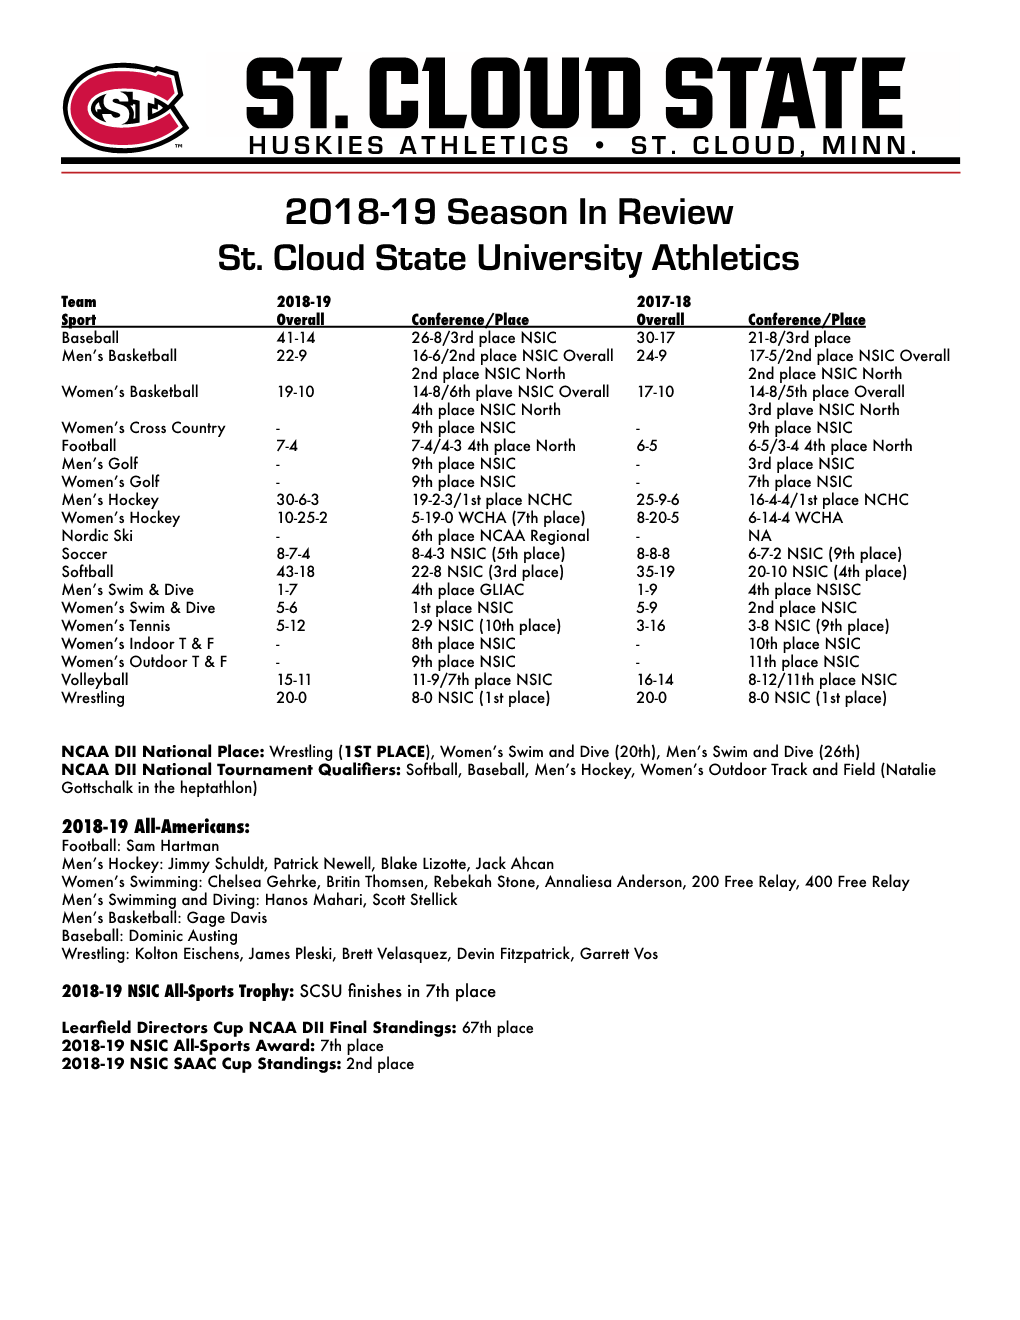 2018-19 Season in Review St. Cloud State University Athletics